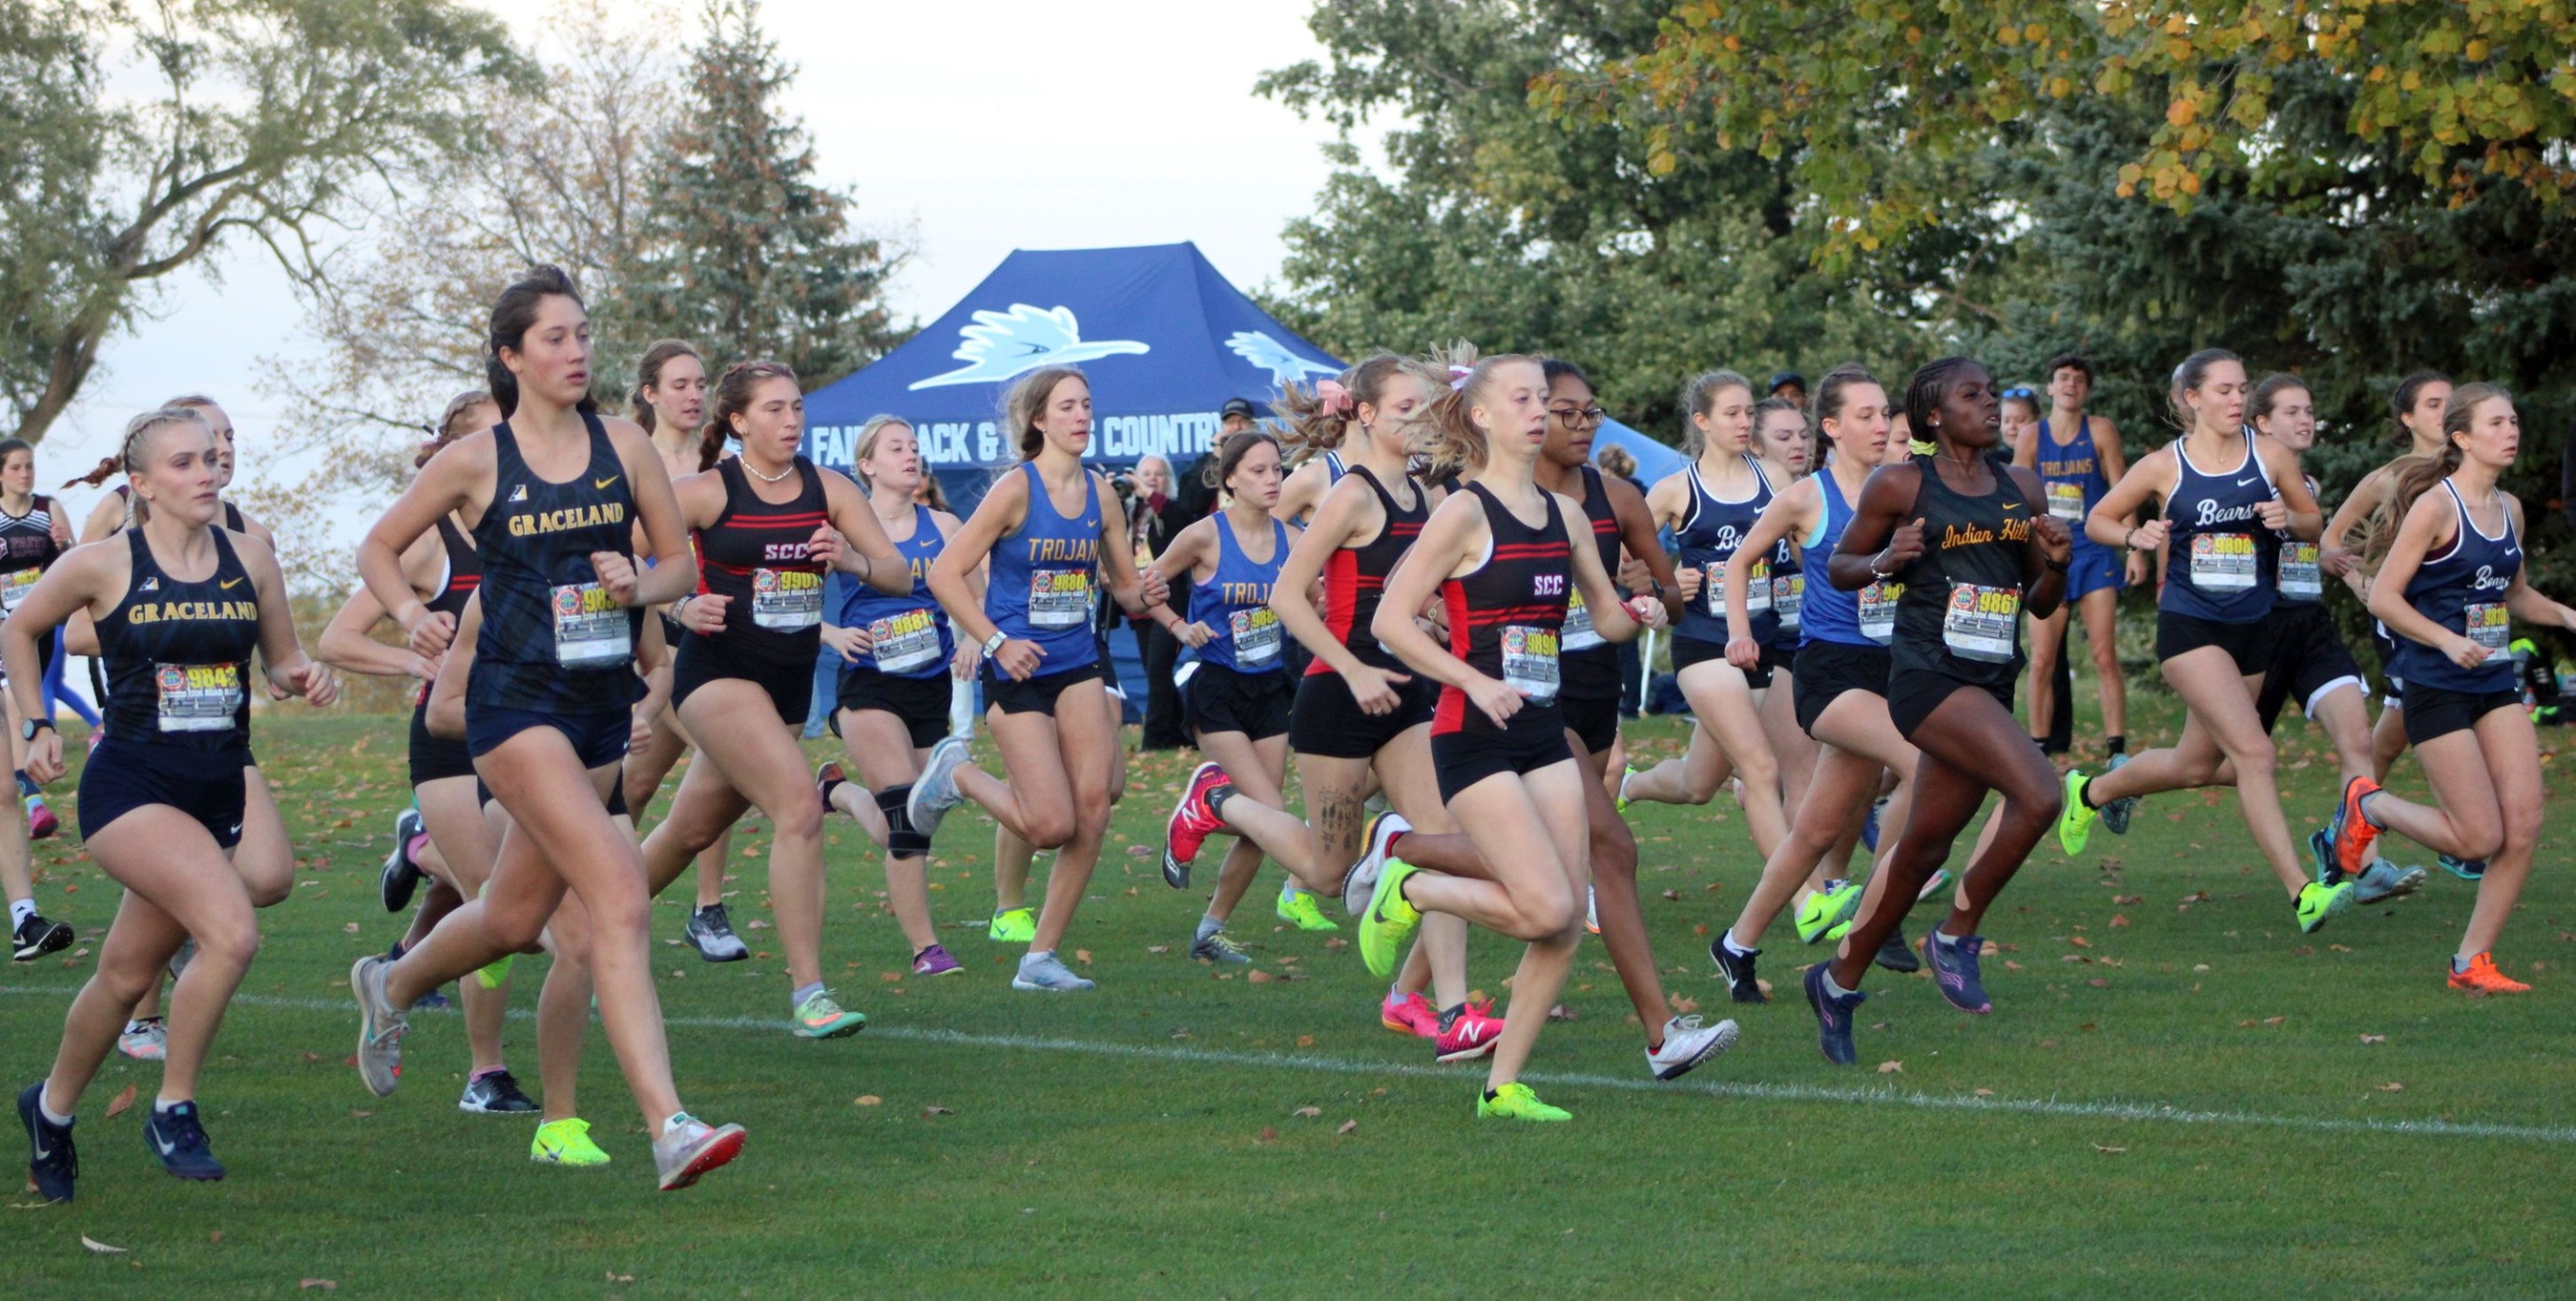 The NIACC women's cross country team at the start of the Oct. 13 Indian Hills Invitational in Ottumwa.